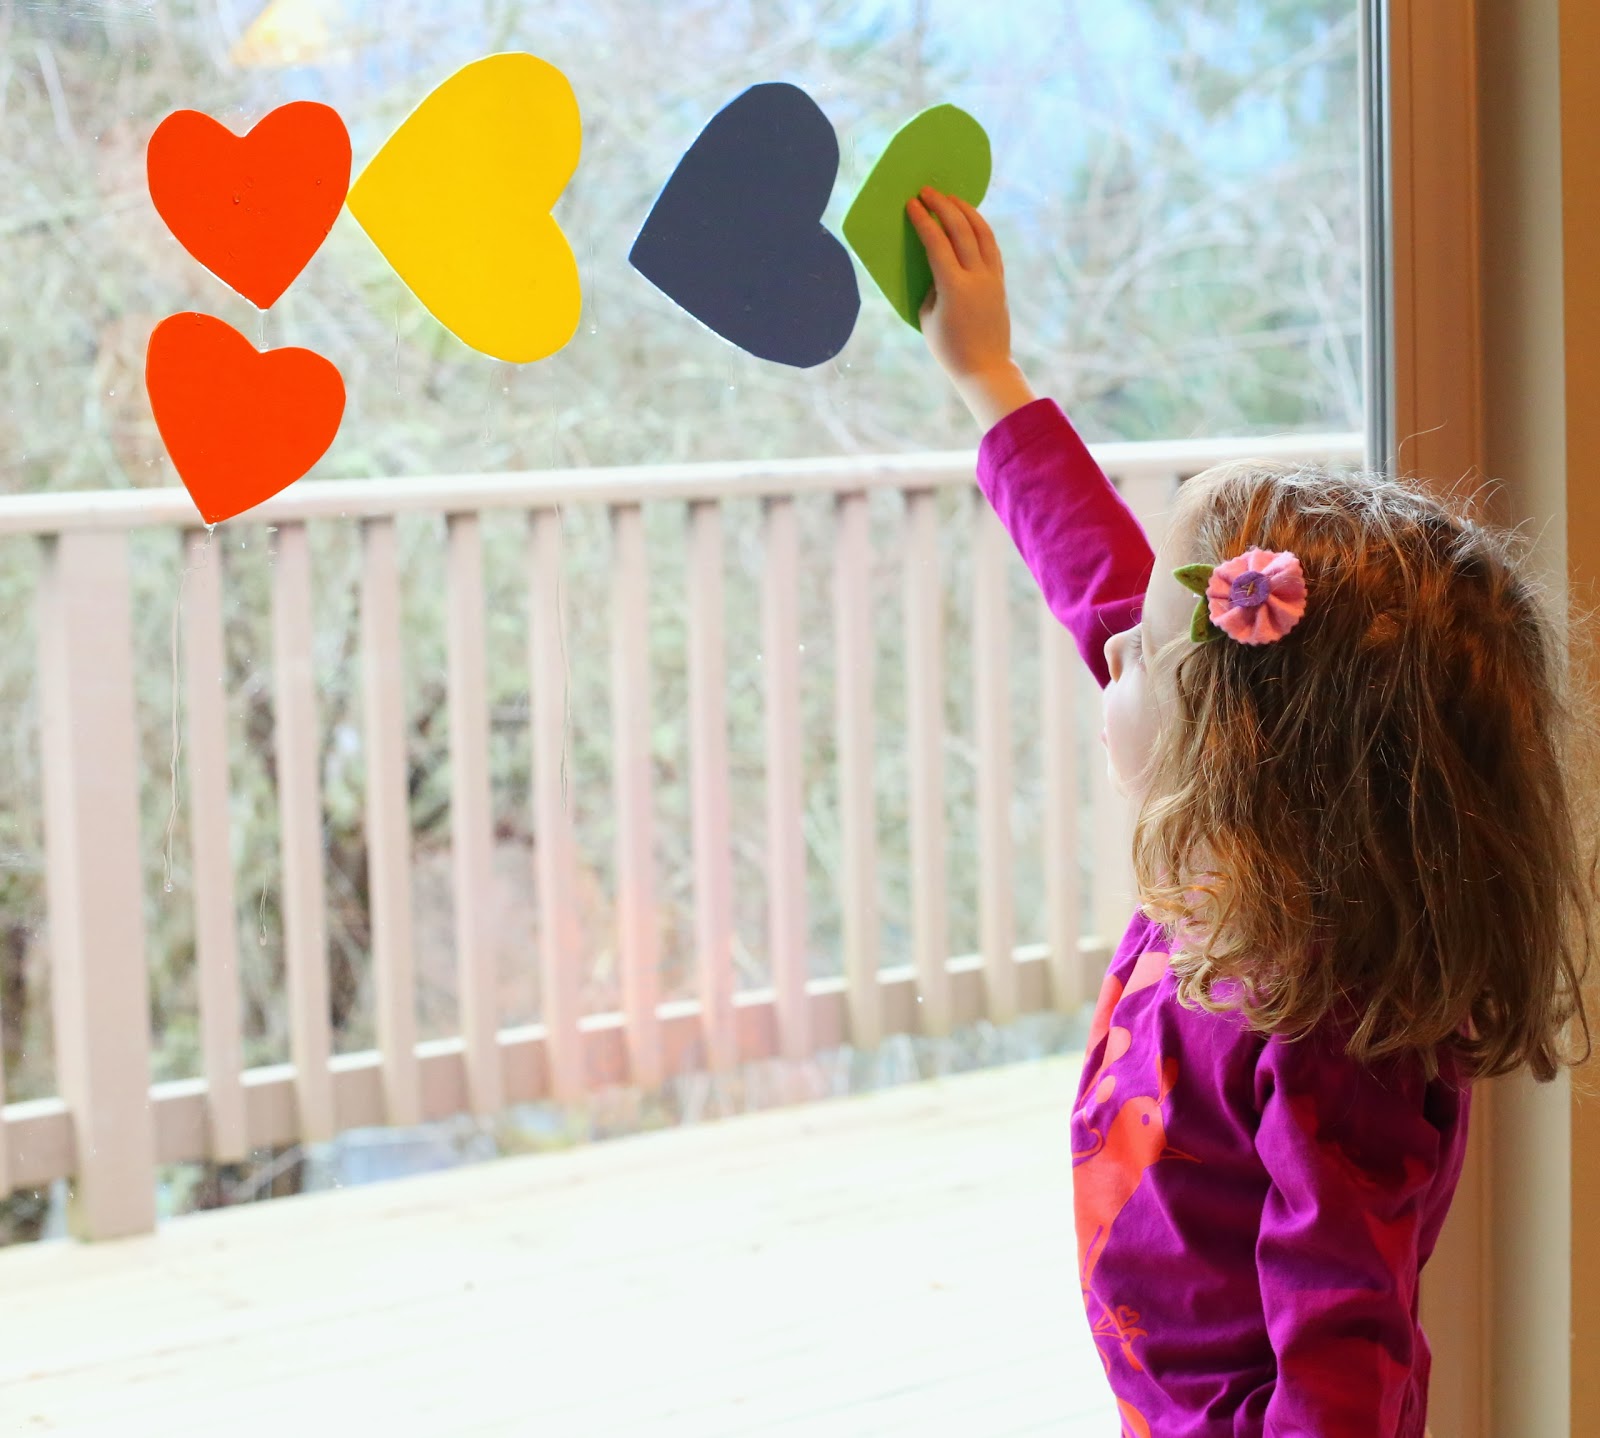 Make your own reusable heart window or bath art set - total cost around one dollar!  From Fun at Home with Kids